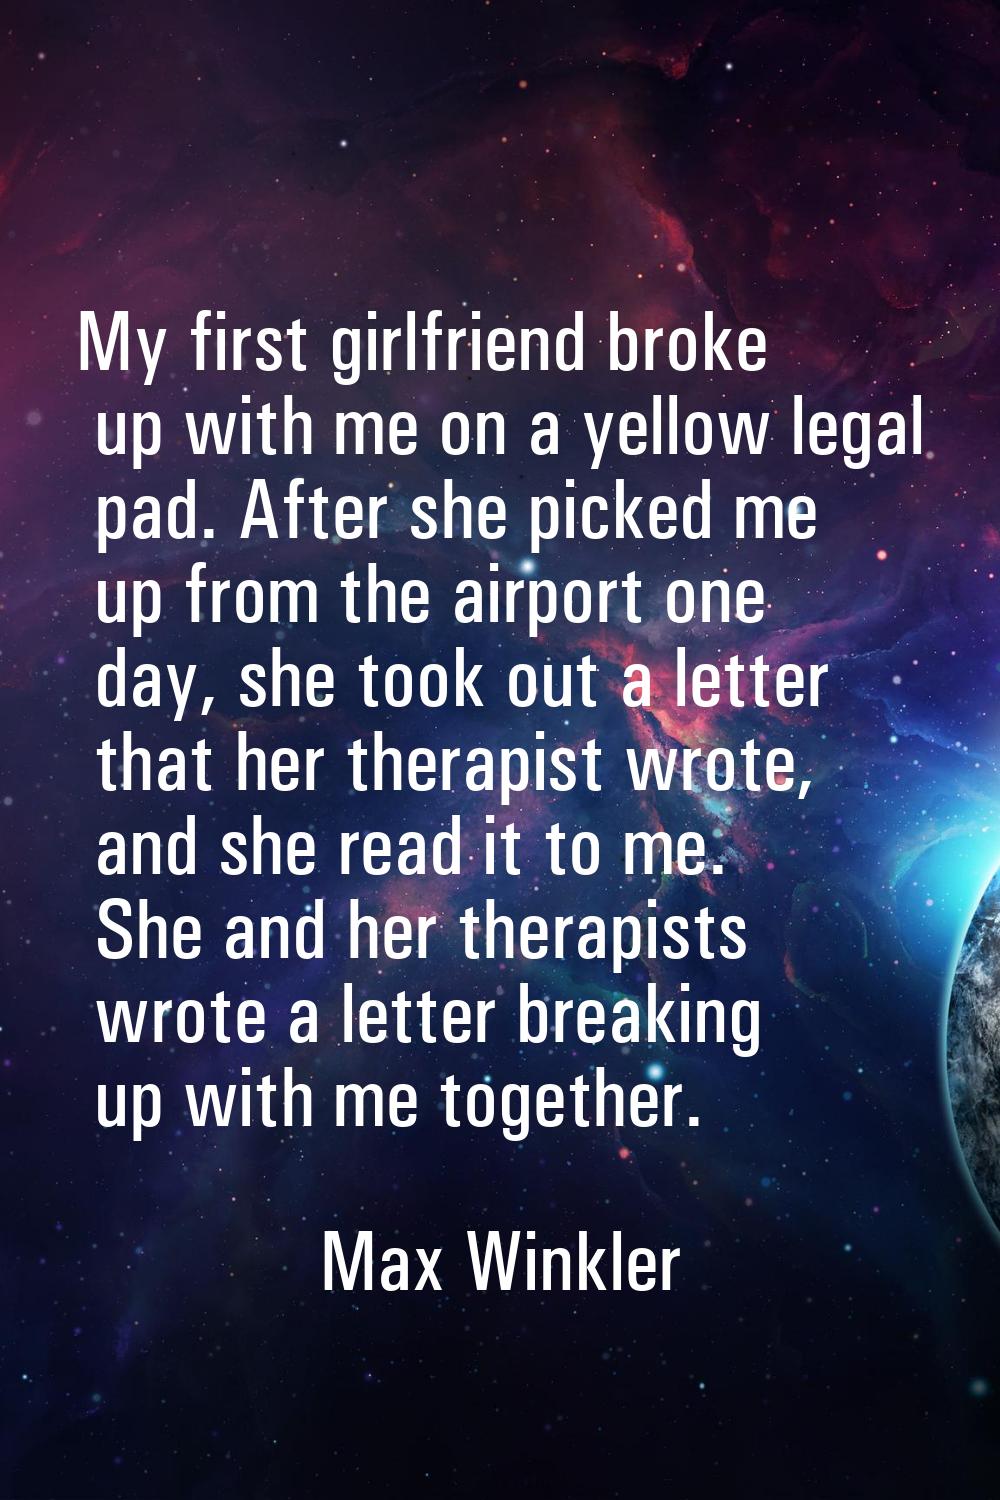 My first girlfriend broke up with me on a yellow legal pad. After she picked me up from the airport